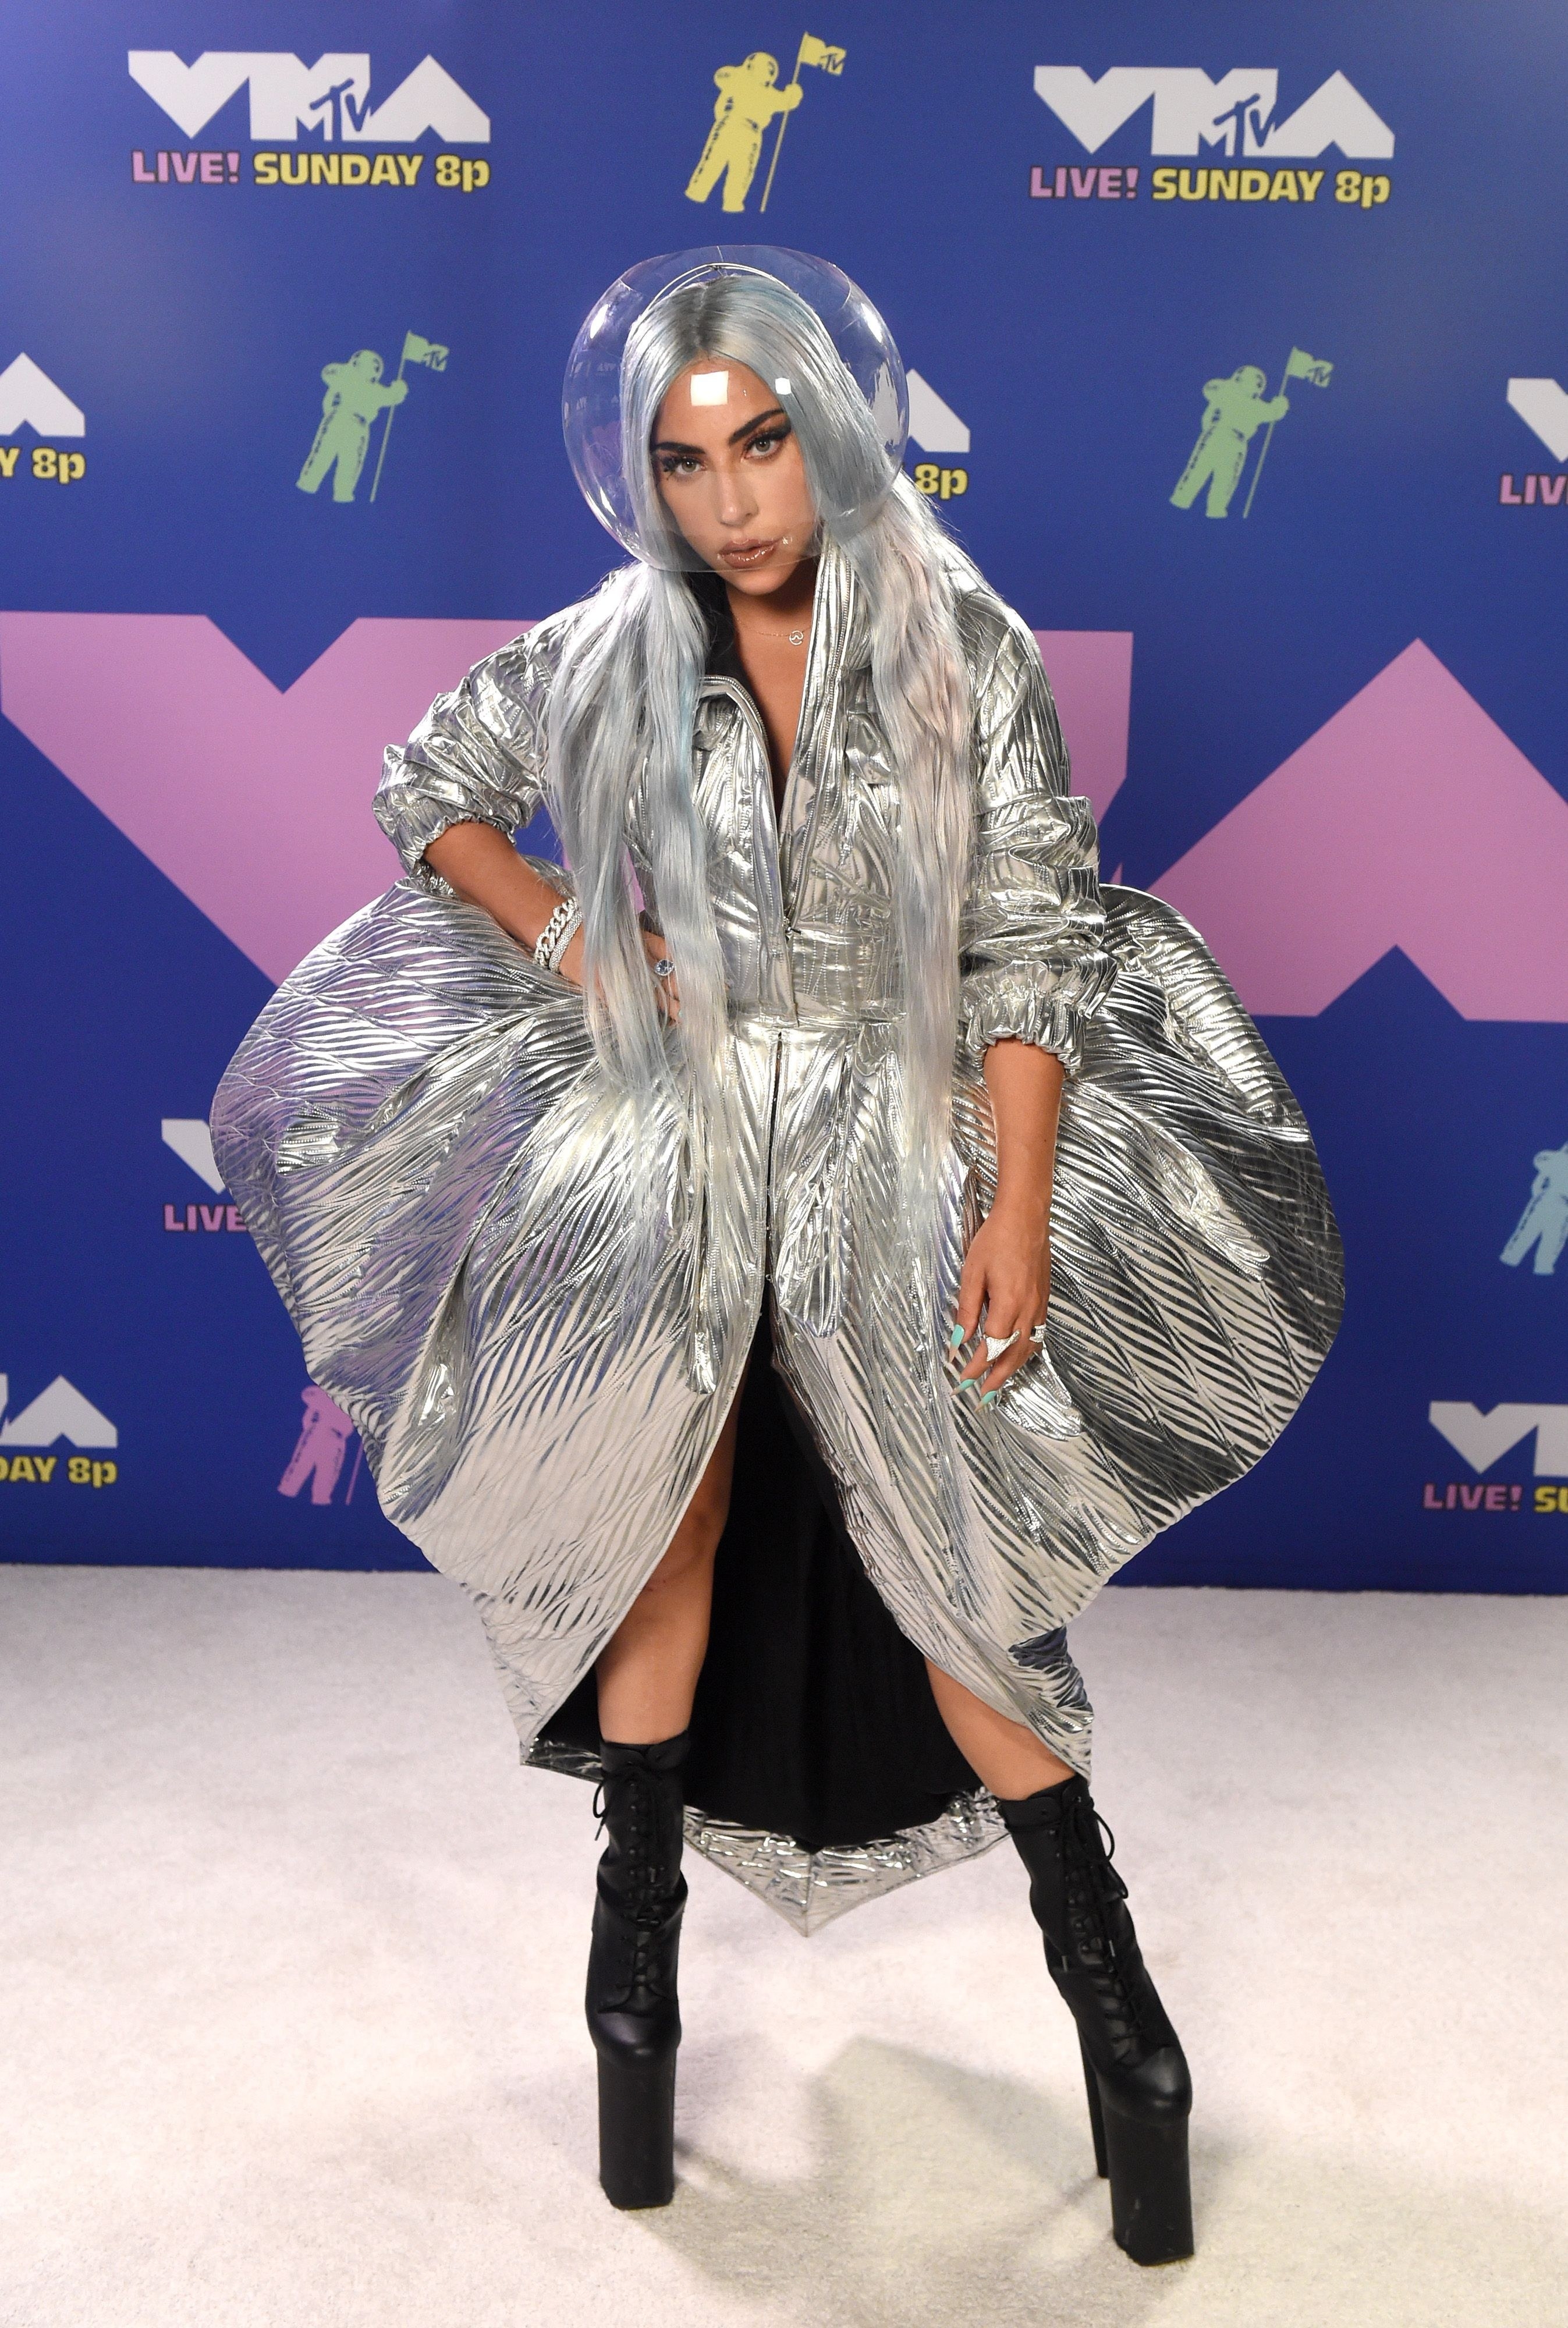 Lady Gaga wearing a fishbowl on her head and a blooming dress at the 2020 MTV Video Music Awards